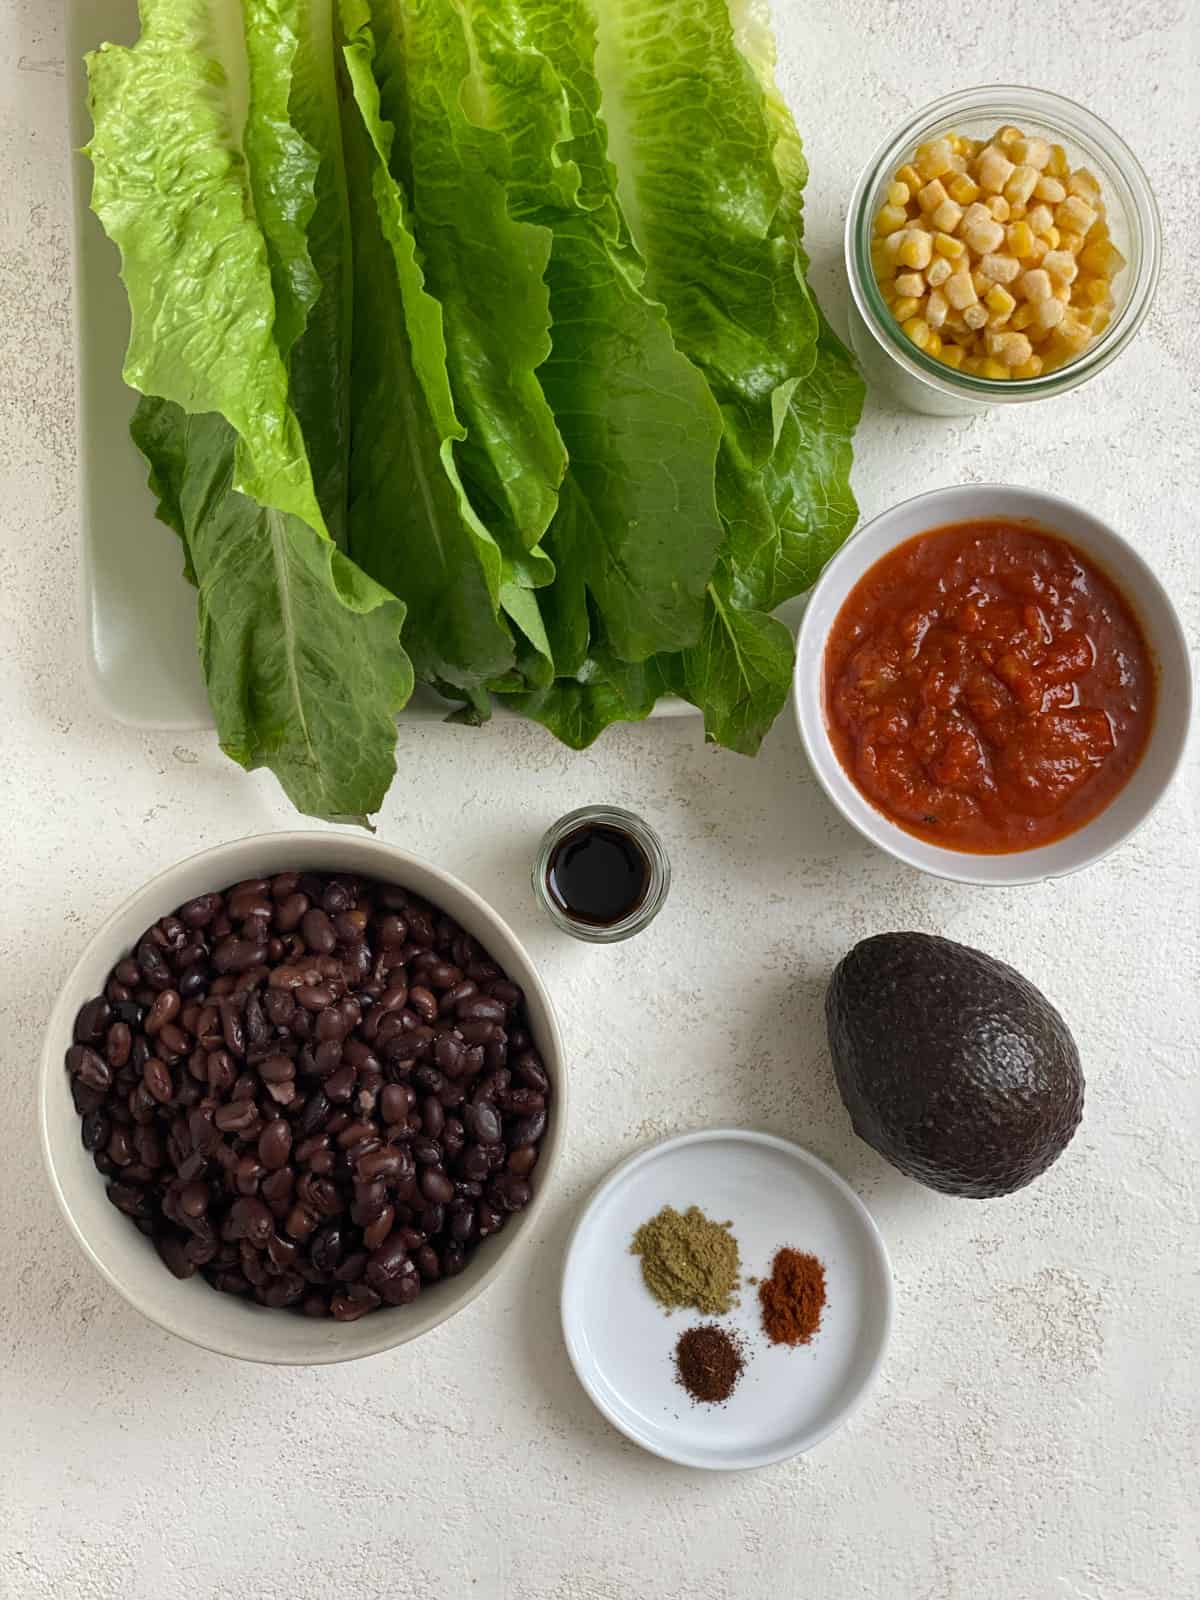 ingredients for Vegan Black Bean Lettuce Wraps measured out against a white surface